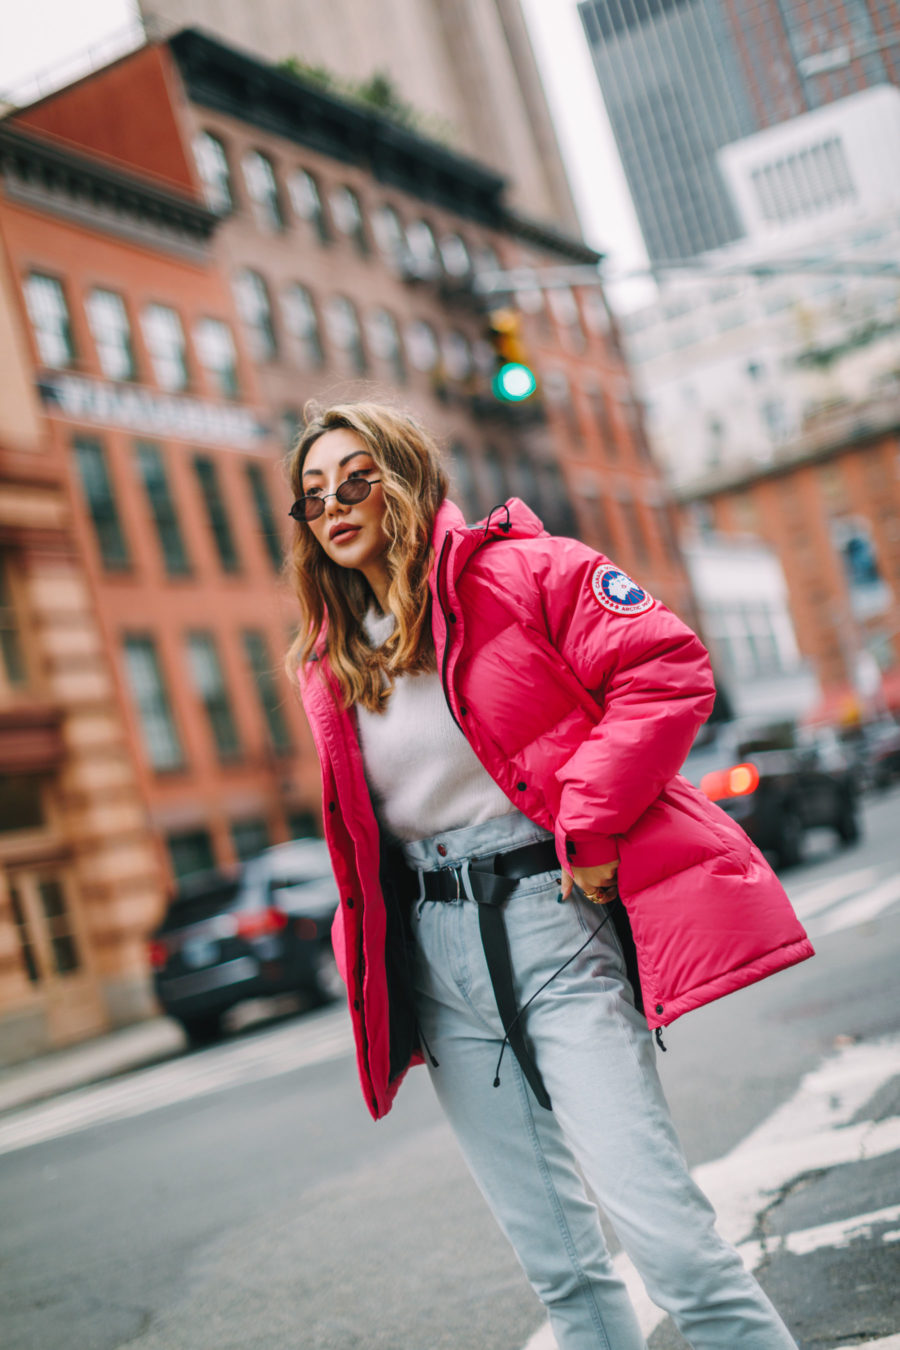 fashion blogger jessica wang shares black friday 2019 sales wearing canada goose pink puffer coat // Notjessfashion.com